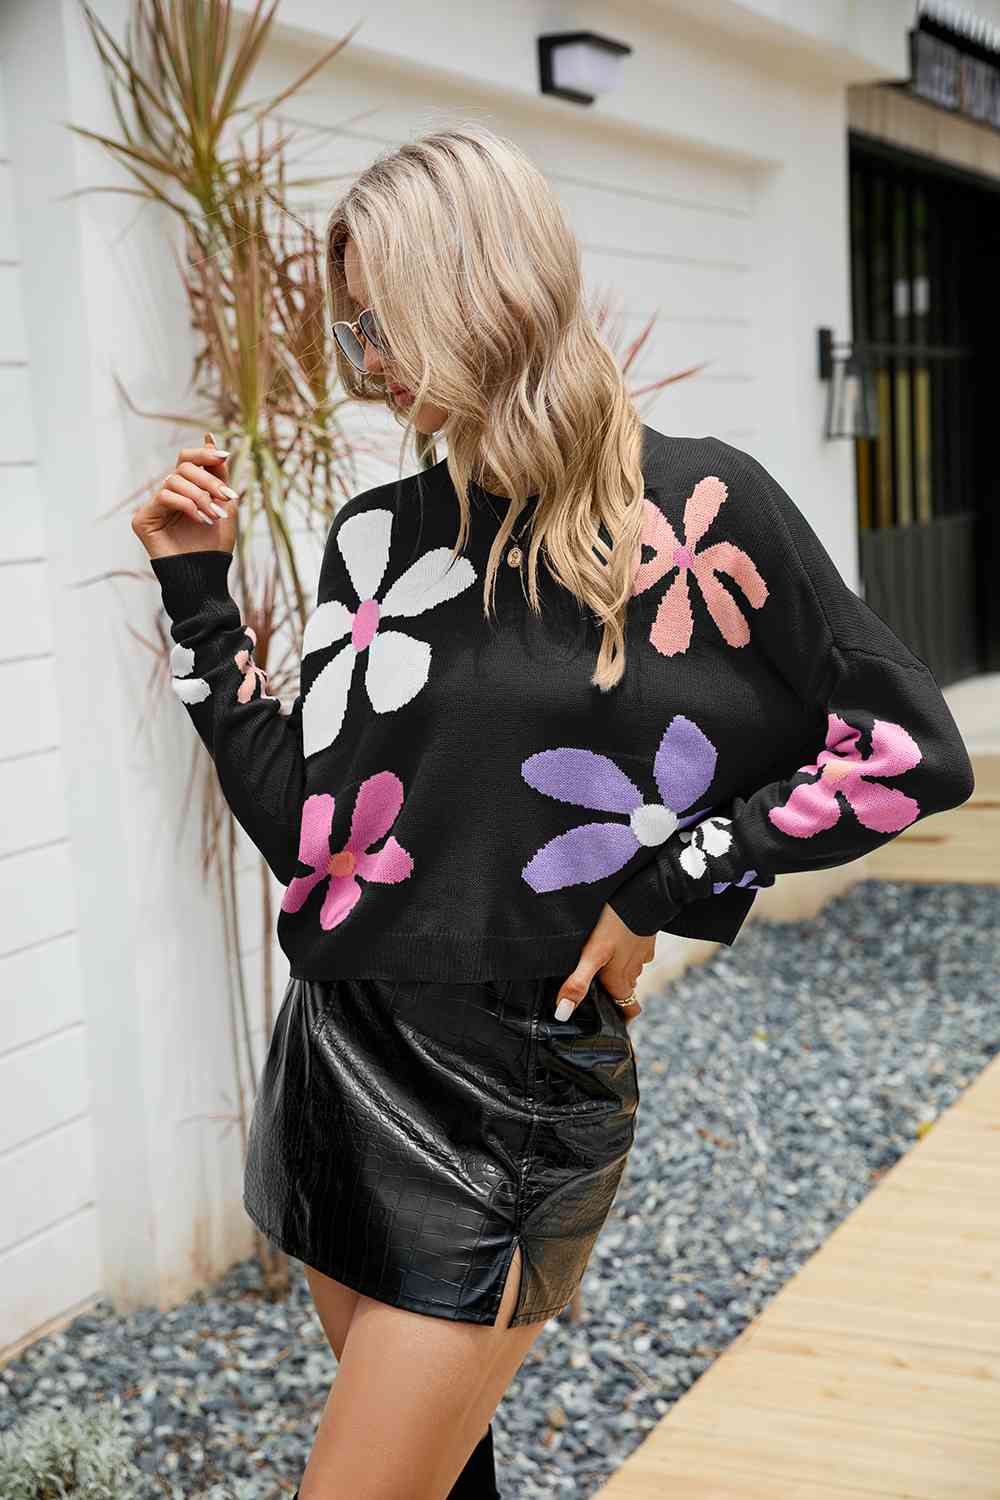 Colorful Knit Daisy Retro Flower Crop Top Long Sleeve Round Neck Sweater Shirt